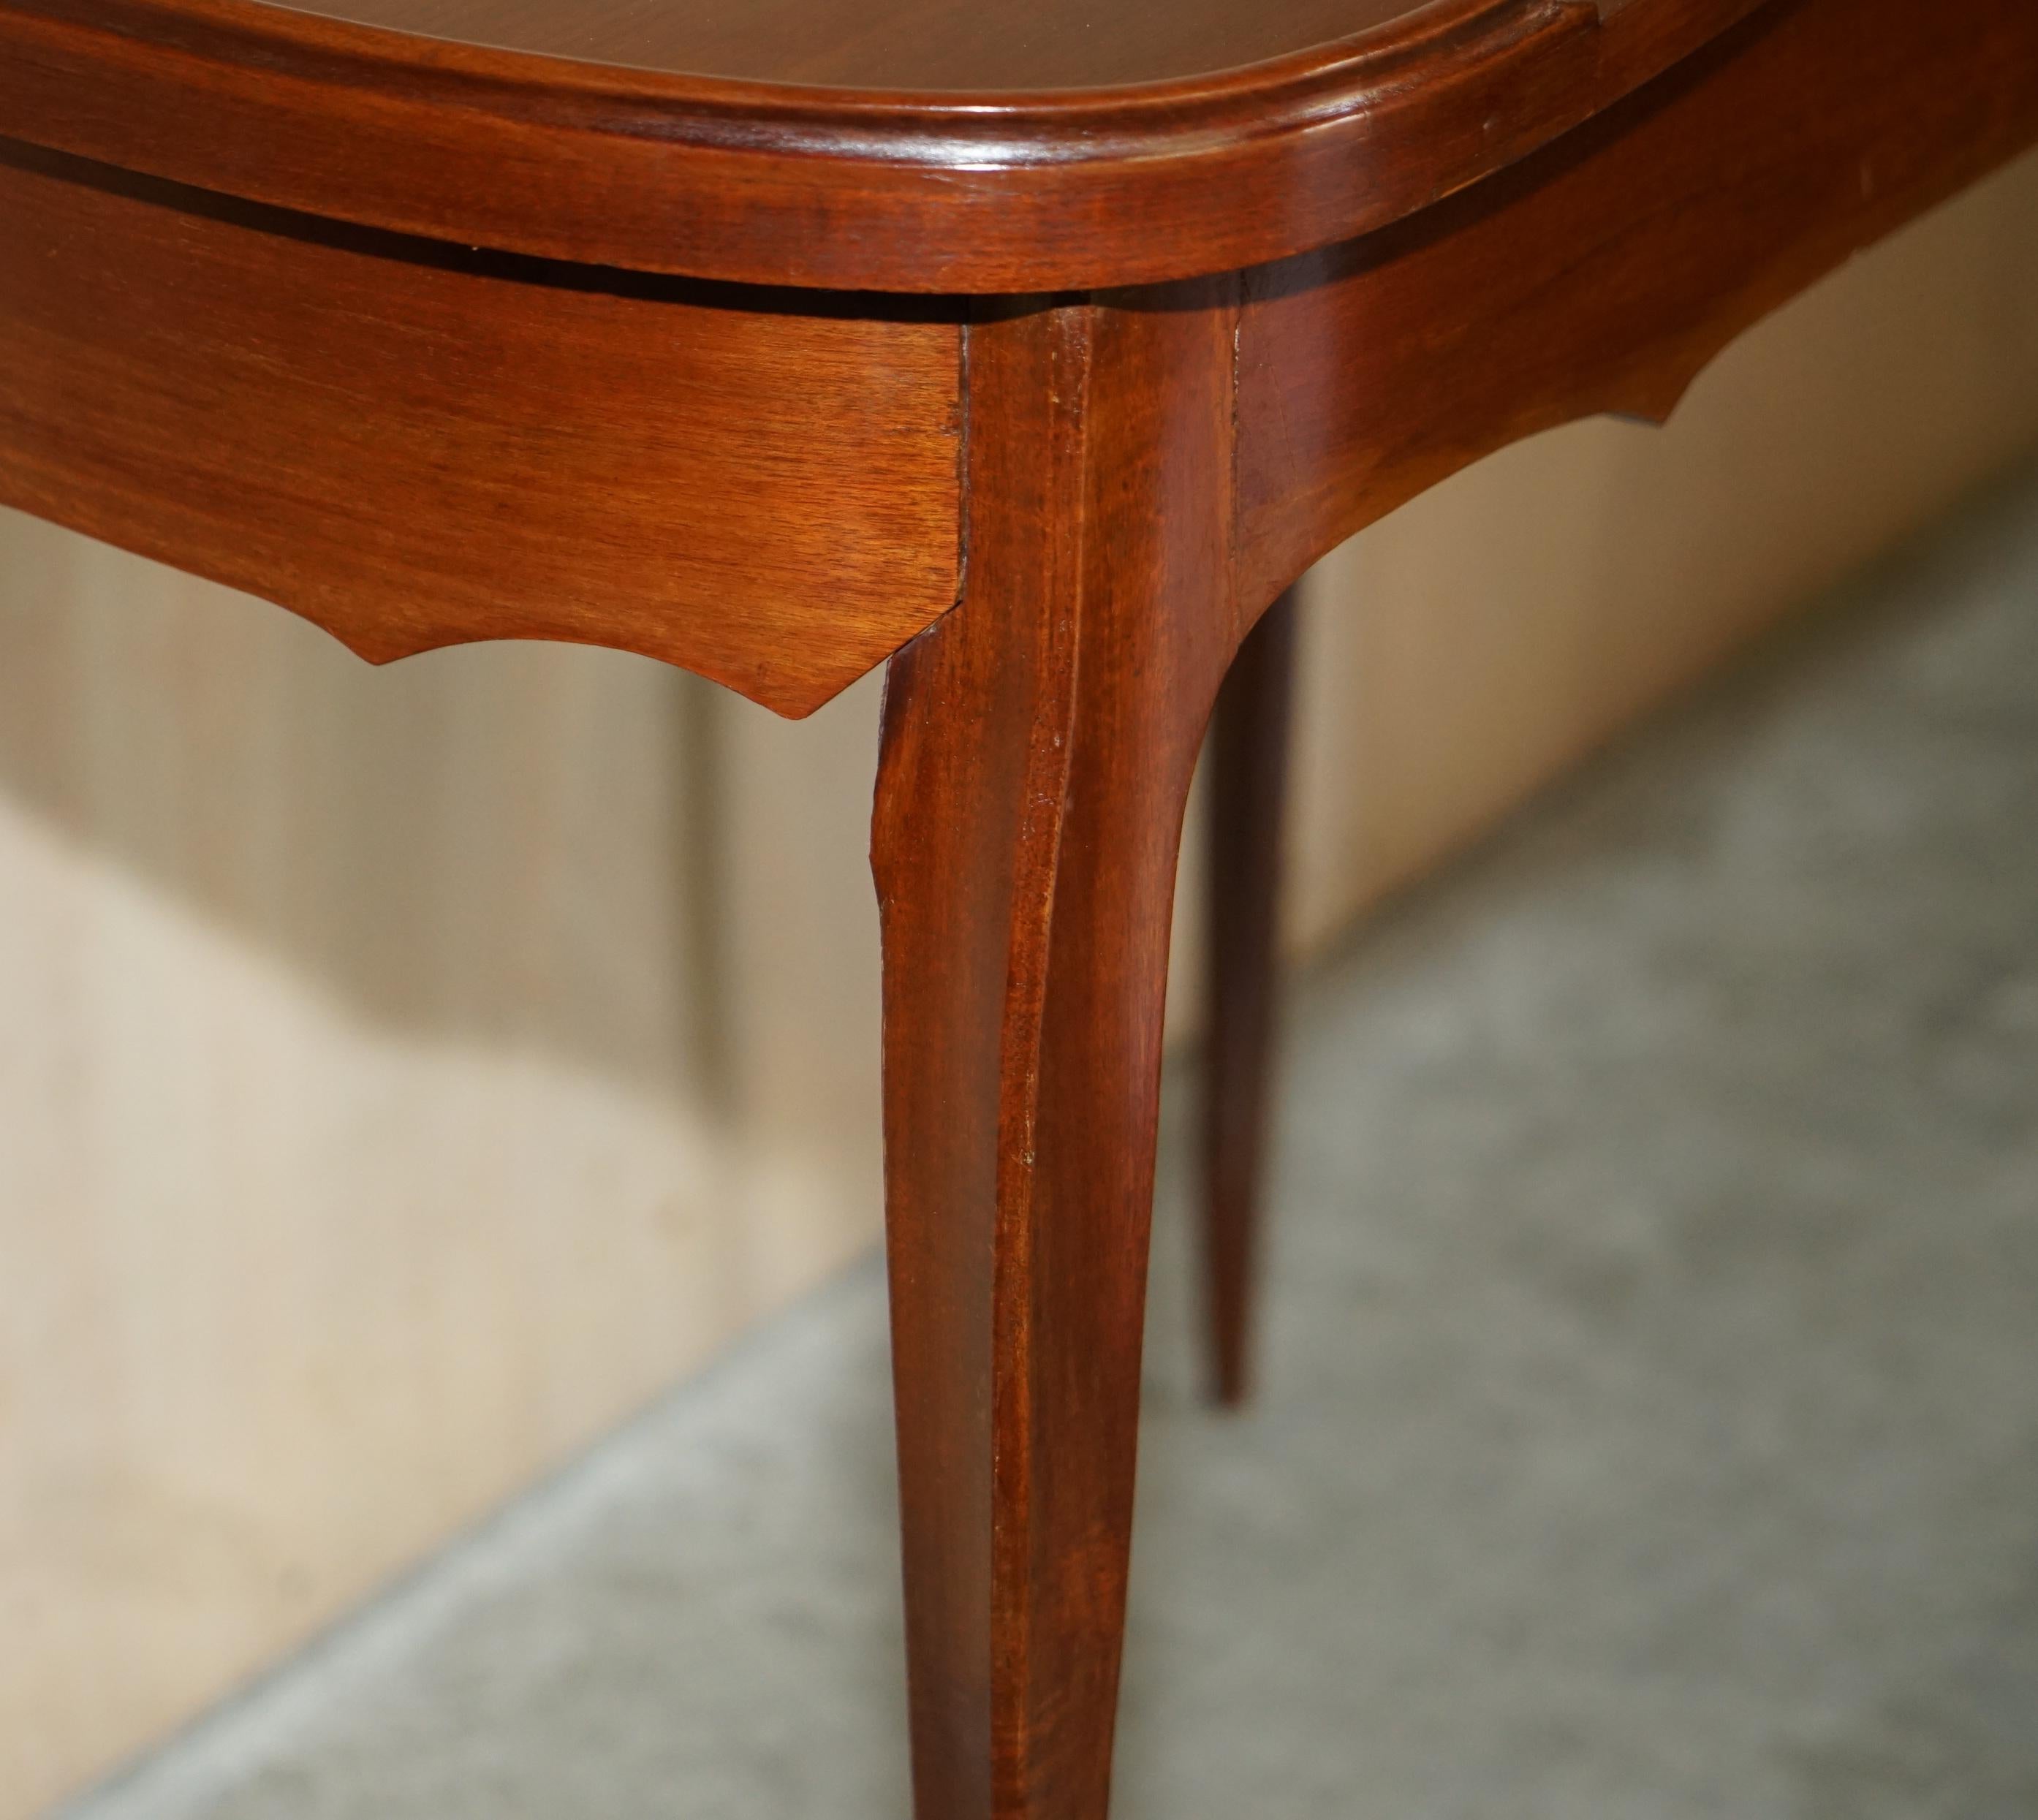 Restored Antique Kidney Shaped Occasional Table with Drawers Brown Leather Top For Sale 4